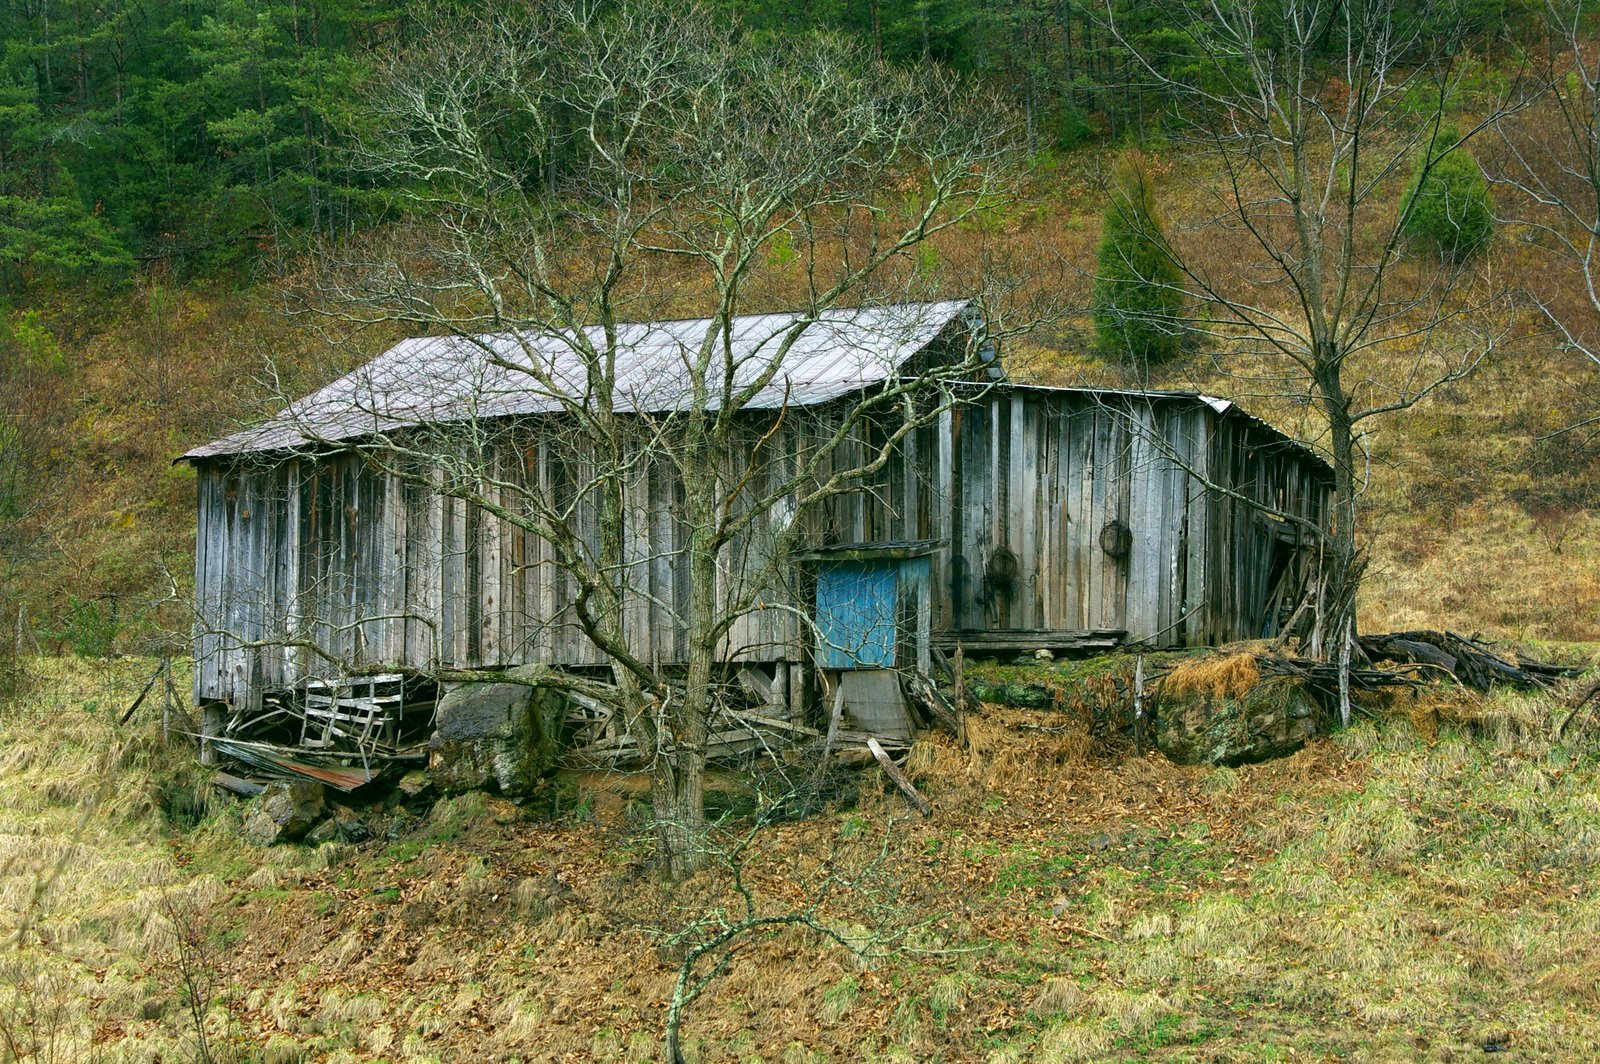 Shack_in_Pigeon_Forge,_TN_by_Zachary_Davies.jpg